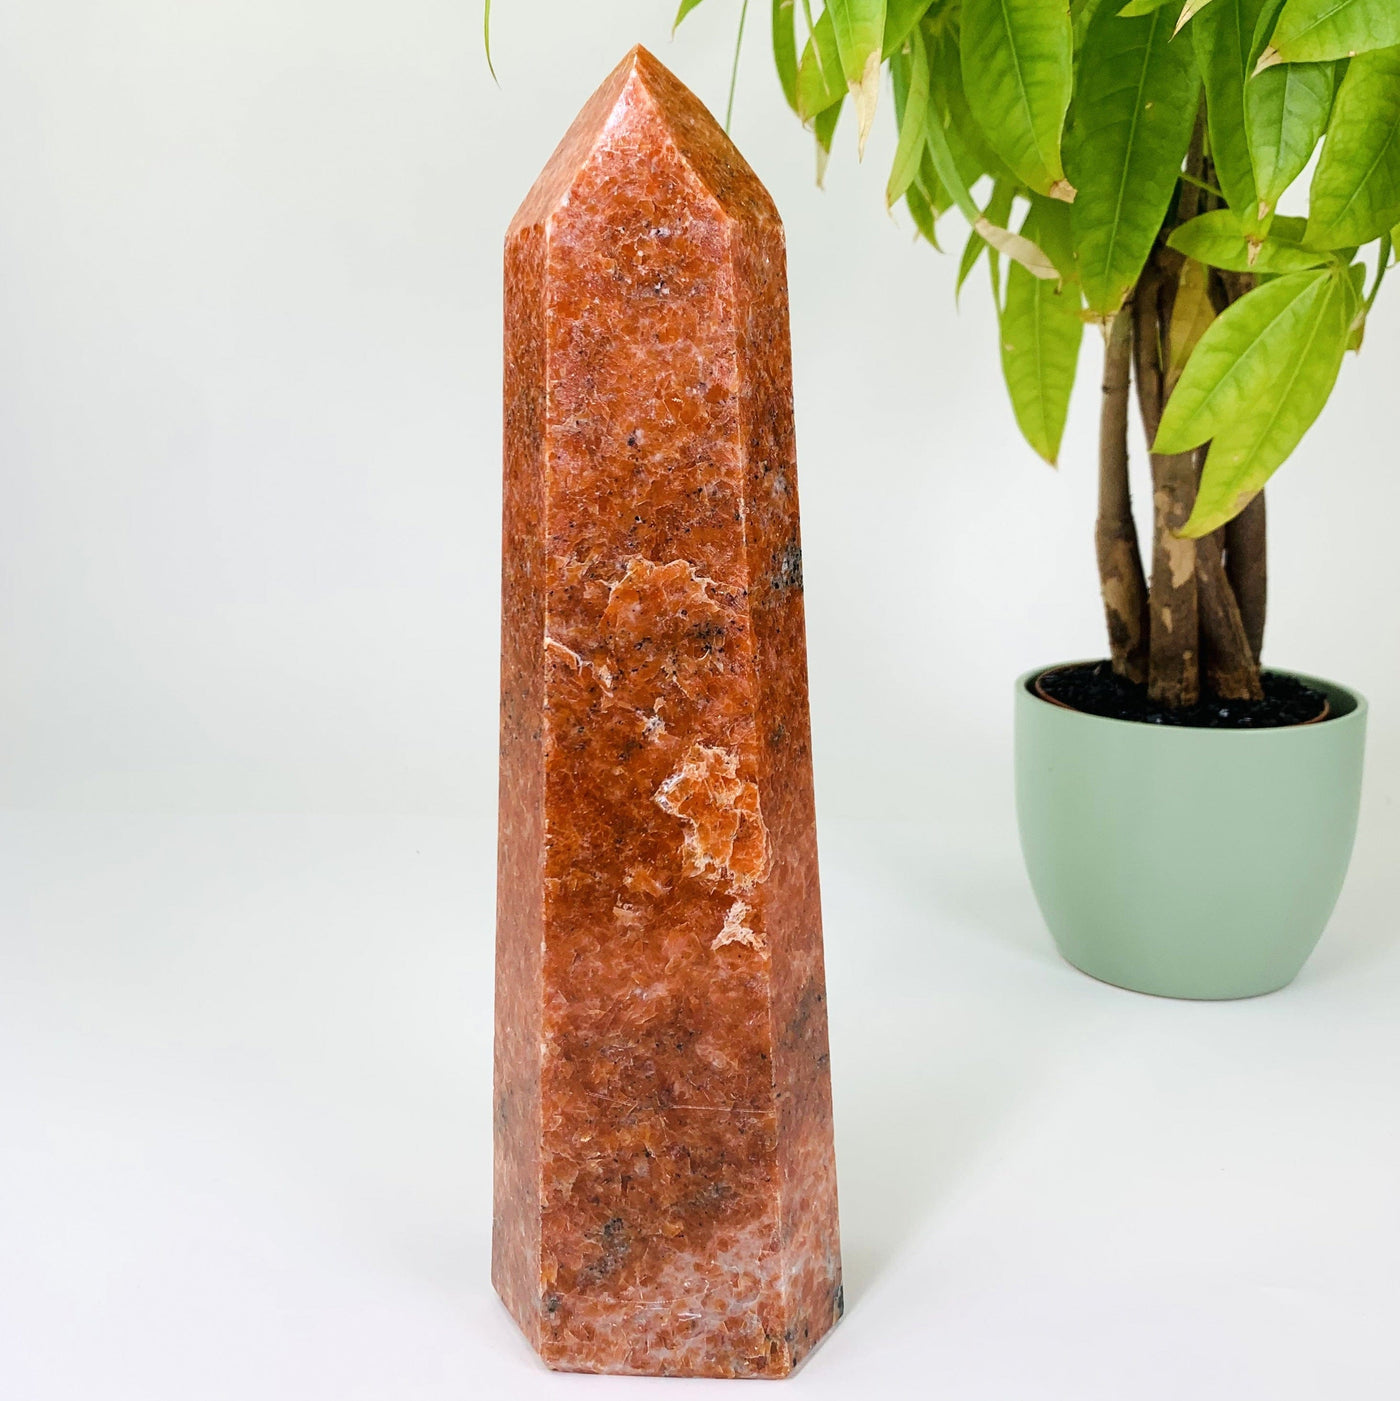 Front side picture of orchid calcite tower point, the orchid calcite point is also being displayed on a white background next to a natural green plant. 